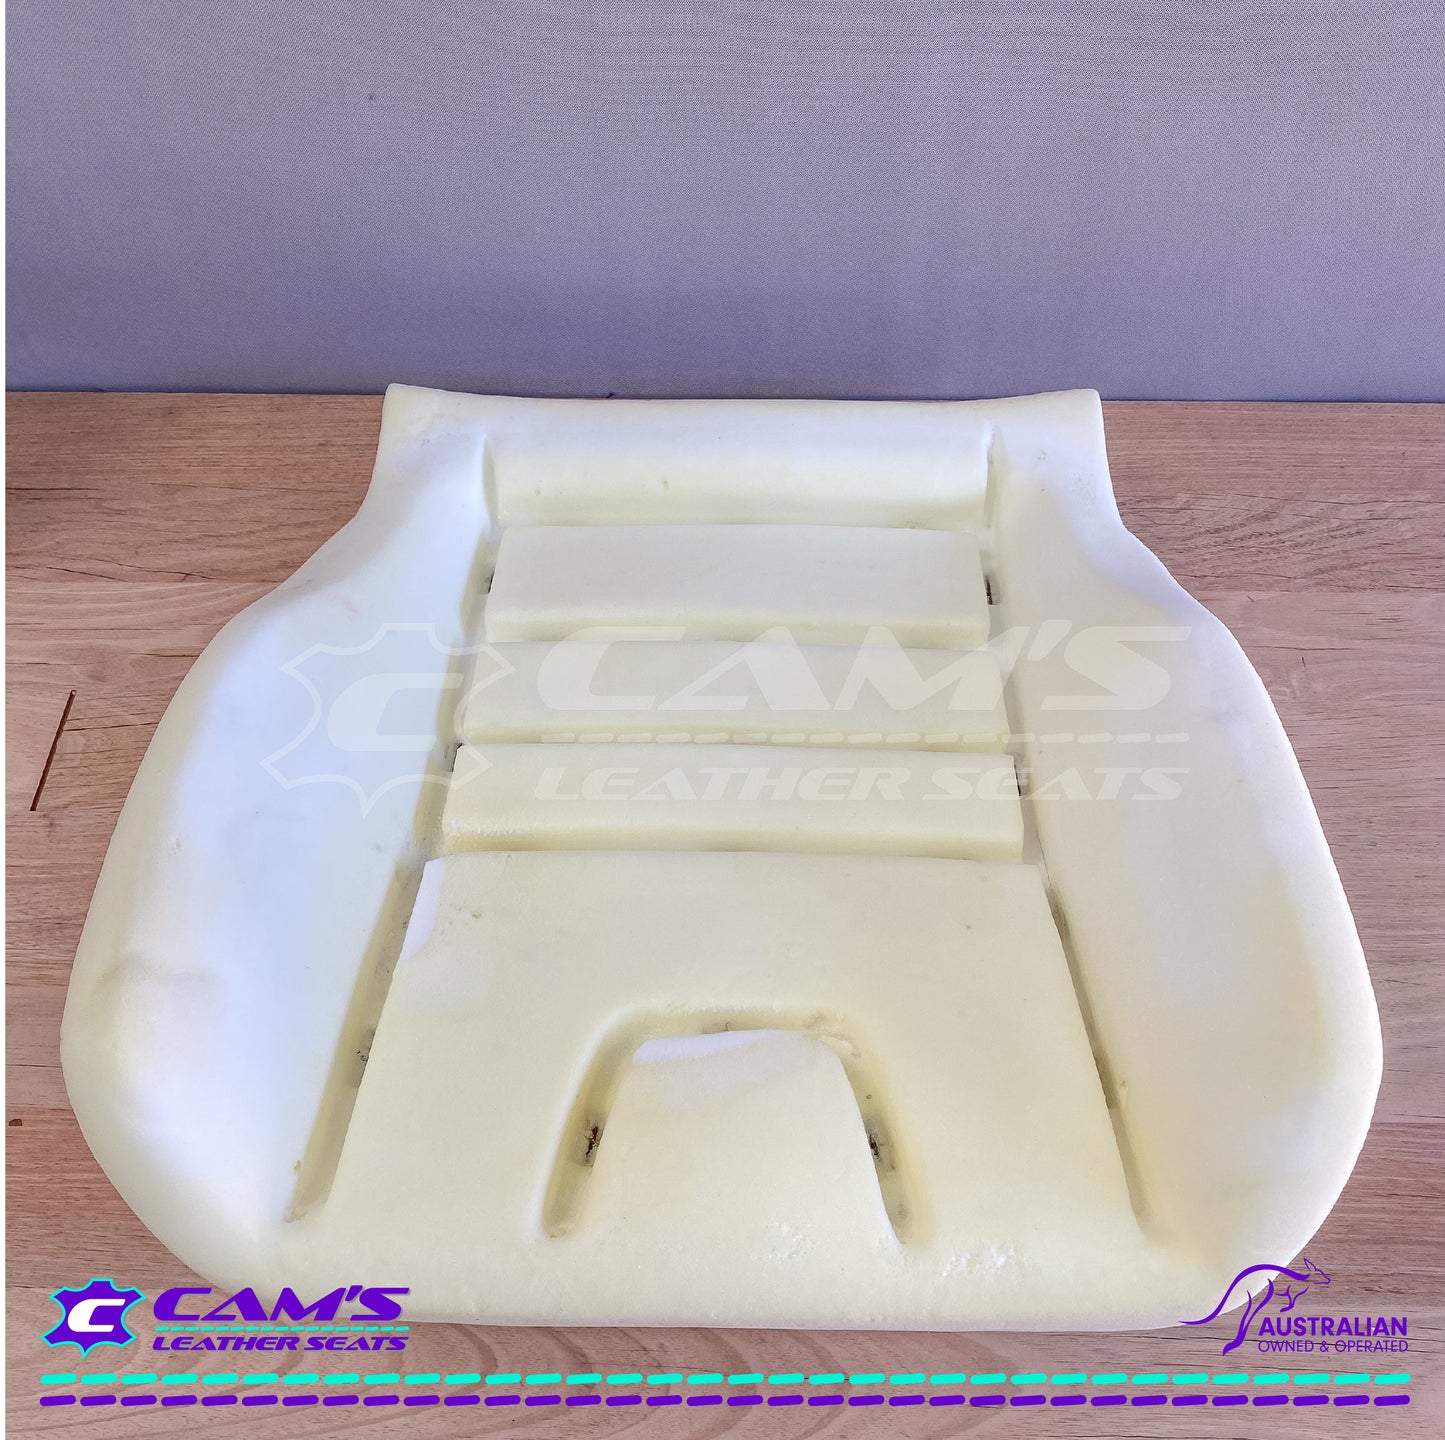 Foams Set for Holden HSV VE GTS / MALOO - 1 front seat foam upgrade - For pair buy 2